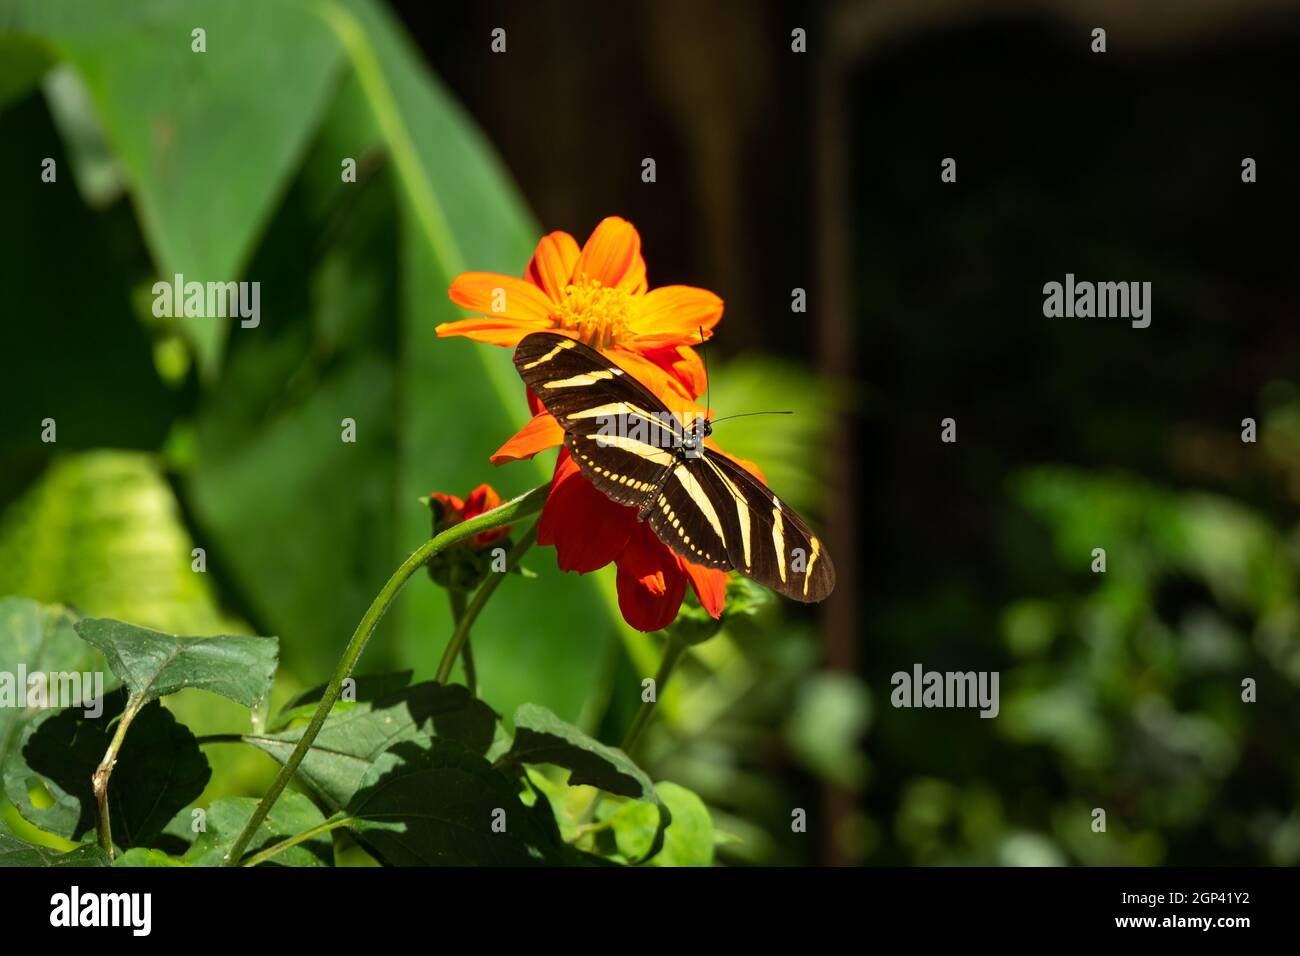 The Zebra Longwing or Zebra Heliconian (Heliconius charithonia), is a Butterfly Perched on a Daisy in a Garden Stock Photo